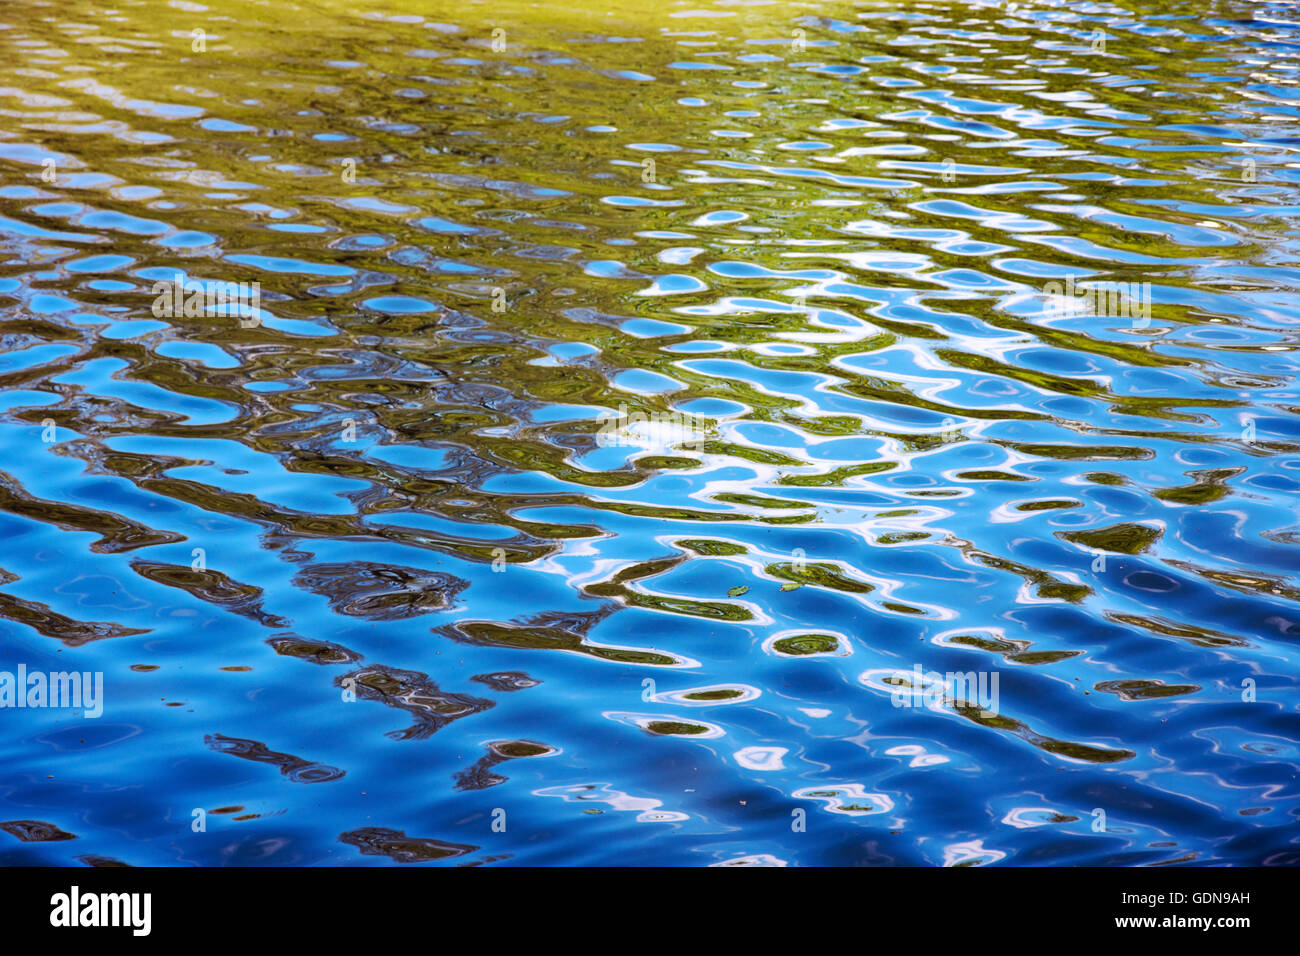 Shimmering water surface reflection Stock Photo